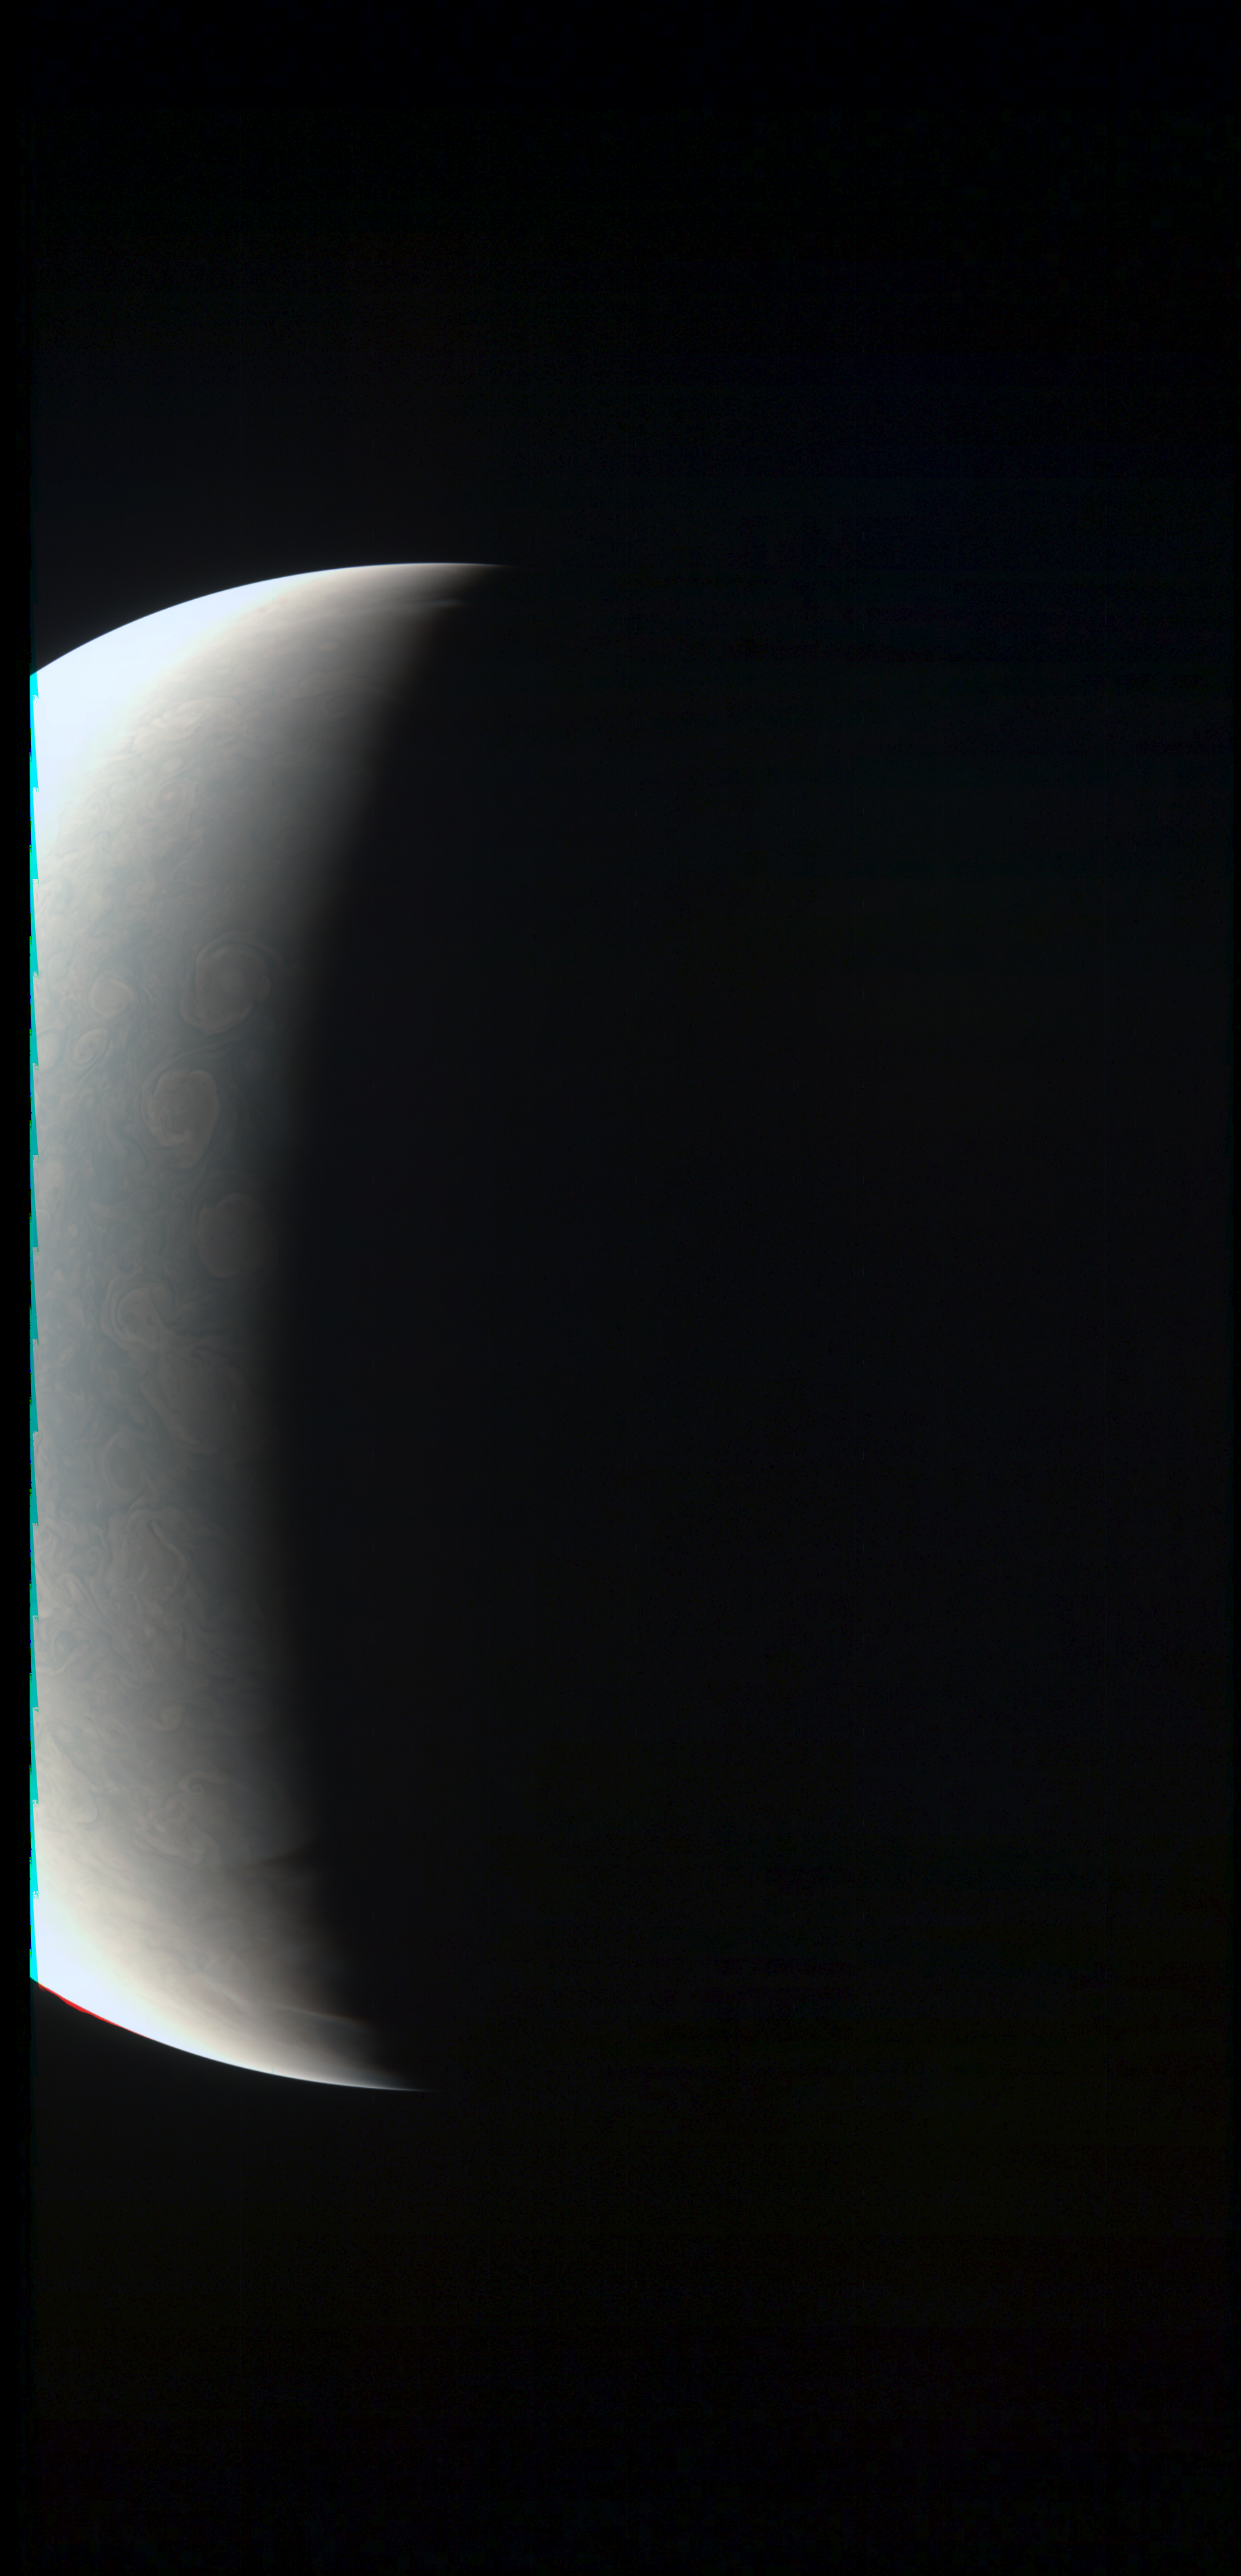 JNCE_2018355_17C00010_V01-raw_proc_hollow_sphere_c_pj_out.BMP_thumbnail_.png